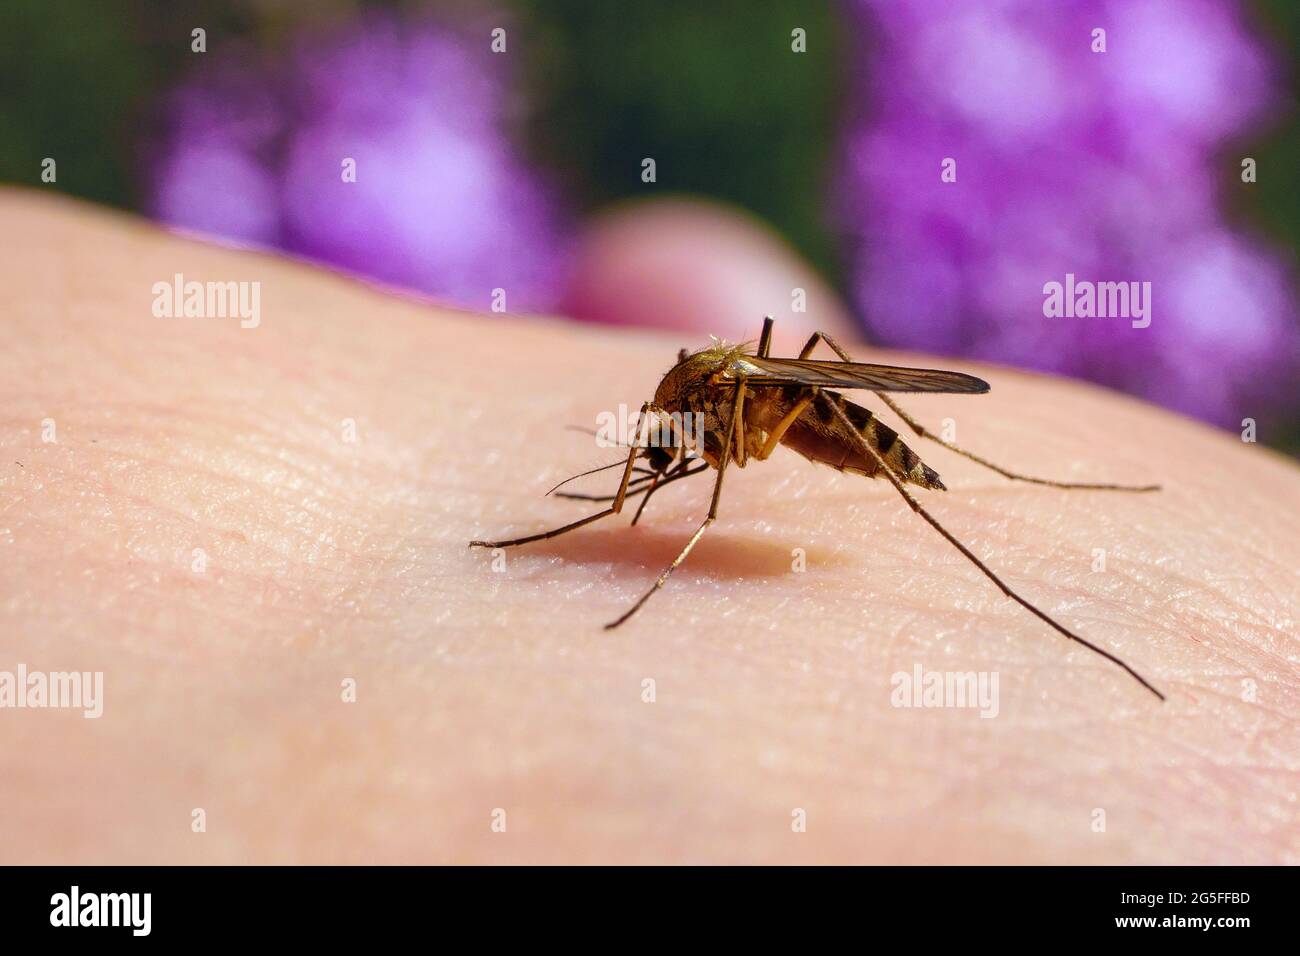 Culex pipiens feeding on a human host. Macro of common house mosquito sucking blood. Stock Photo